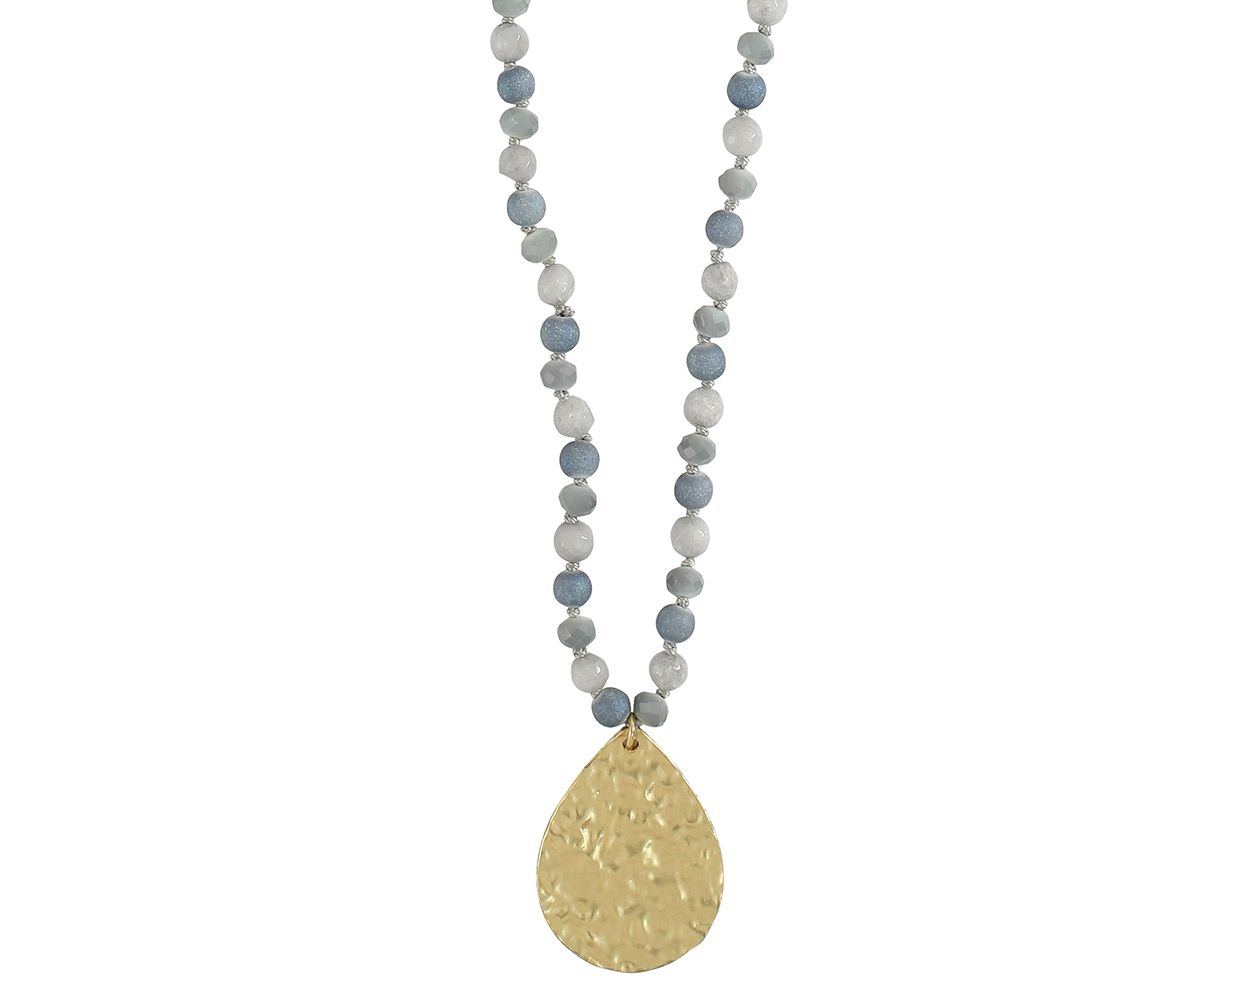 Hammered Gold w/ Soft Blue Beads Necklace